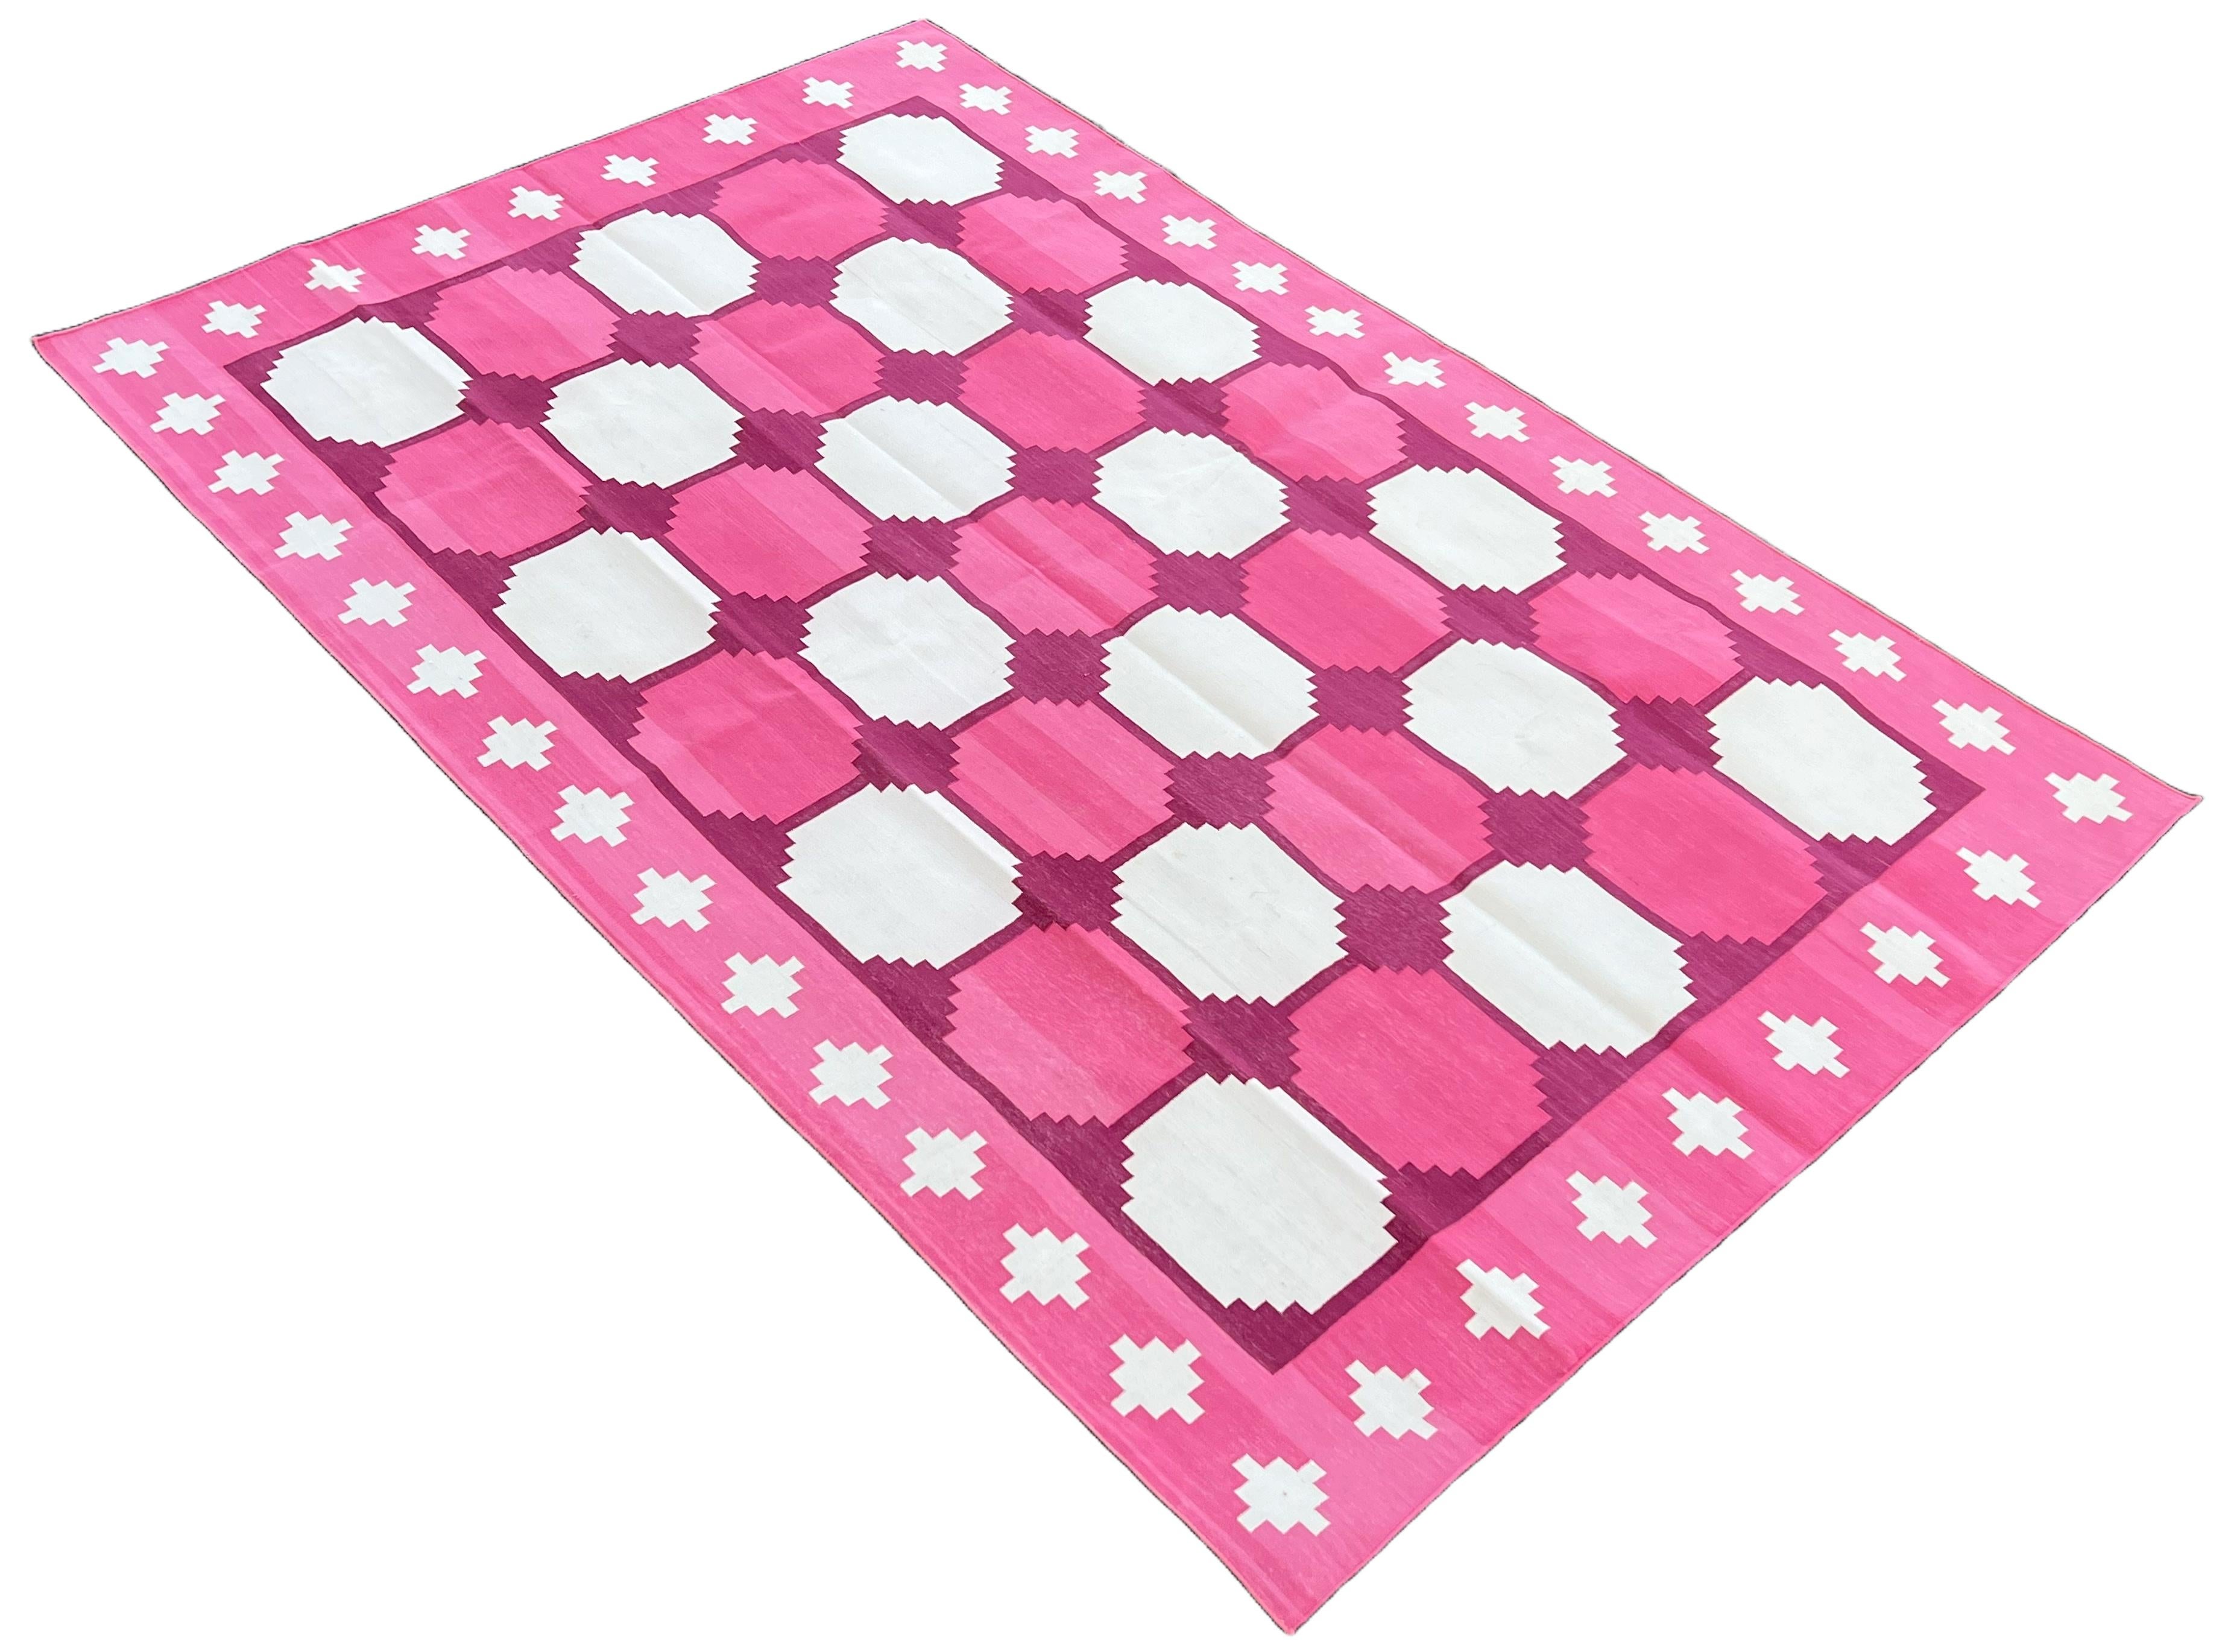 Mid-Century Modern Handmade Cotton Area Flat Weave Rug, Pink & White Indian Star Geometric Dhurrie For Sale